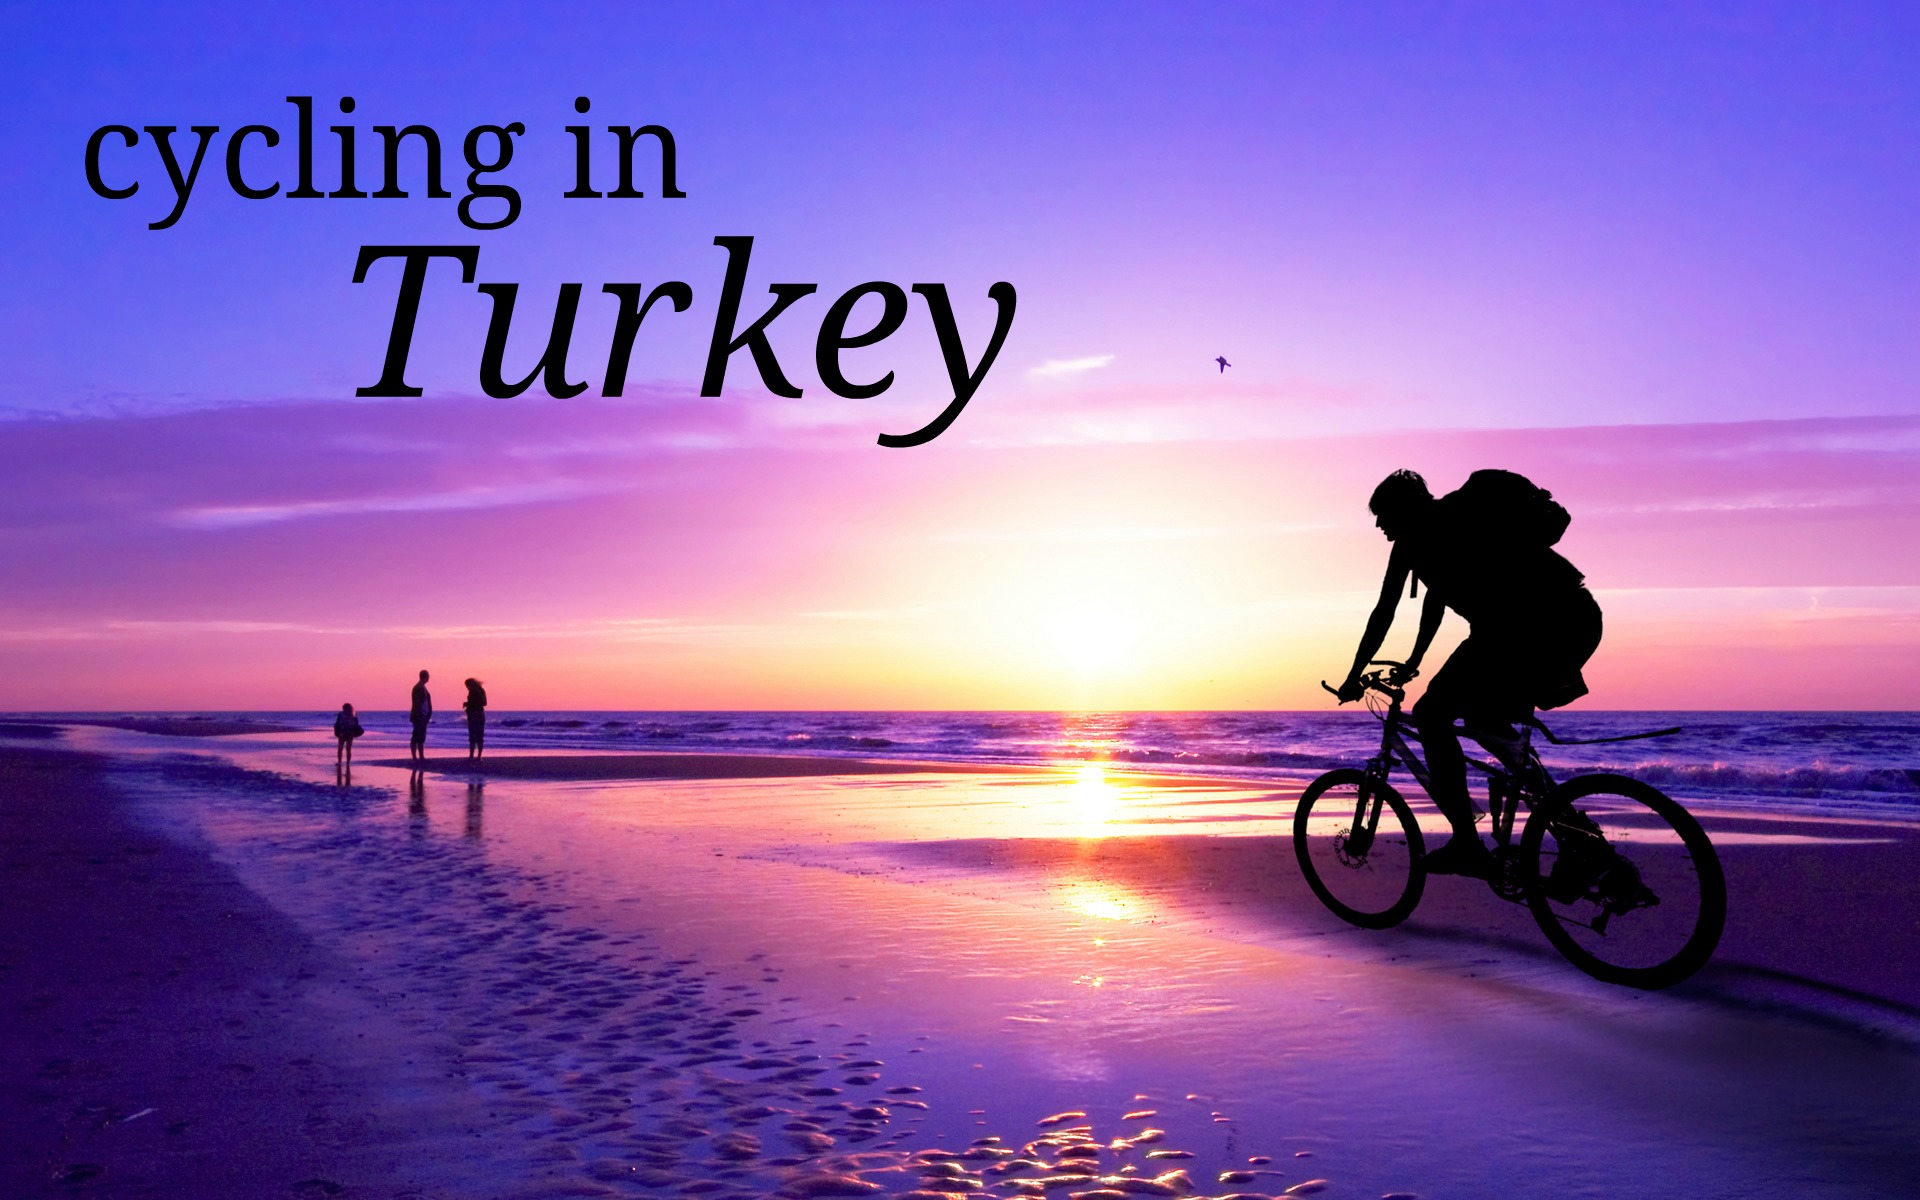 Pedal power: cycling in Turkey